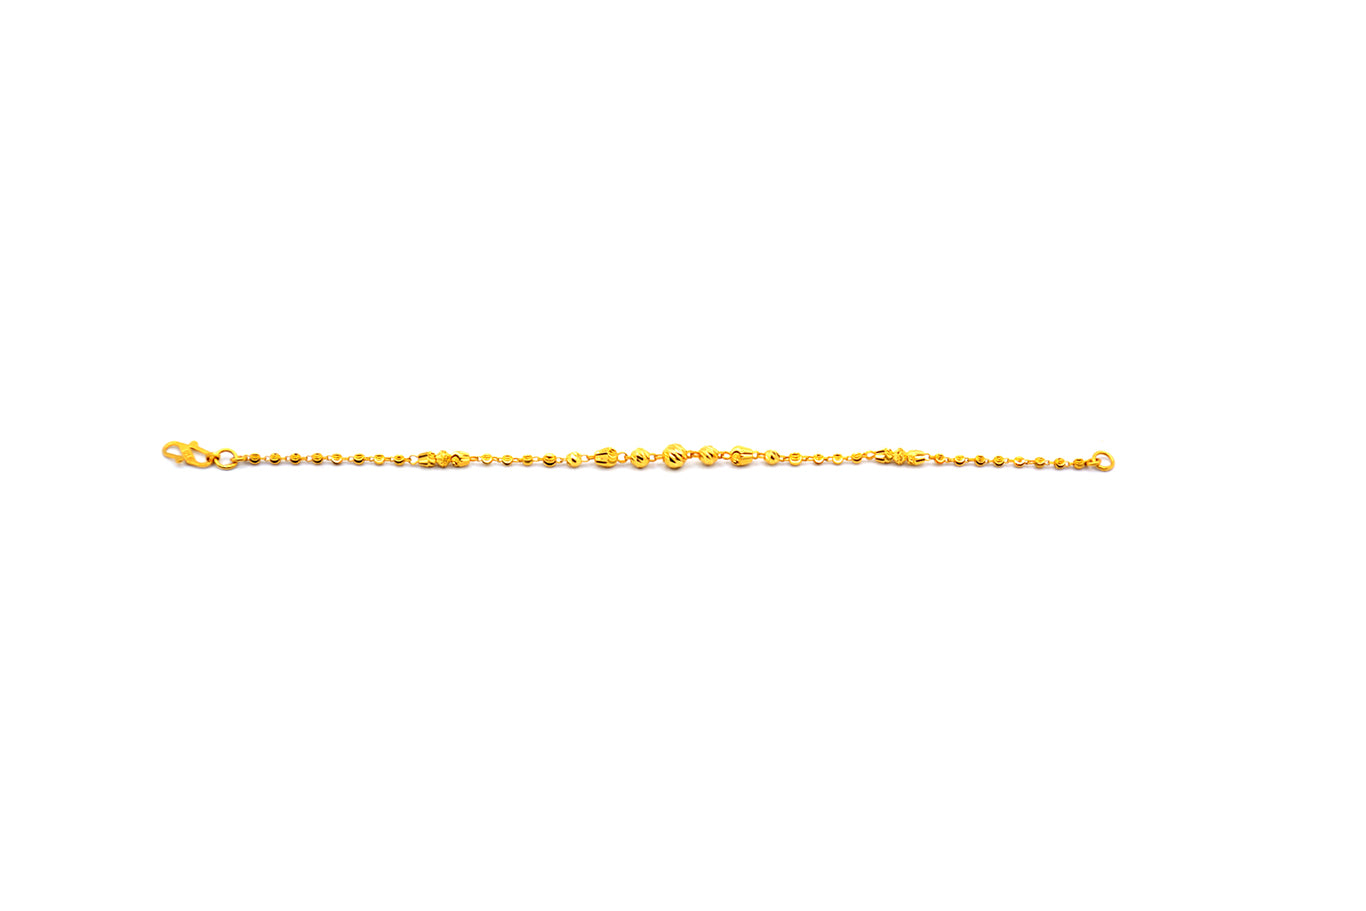 22K Gold Bracelet in Bead Chain with 3 Sand Finished Cylindrical Bars